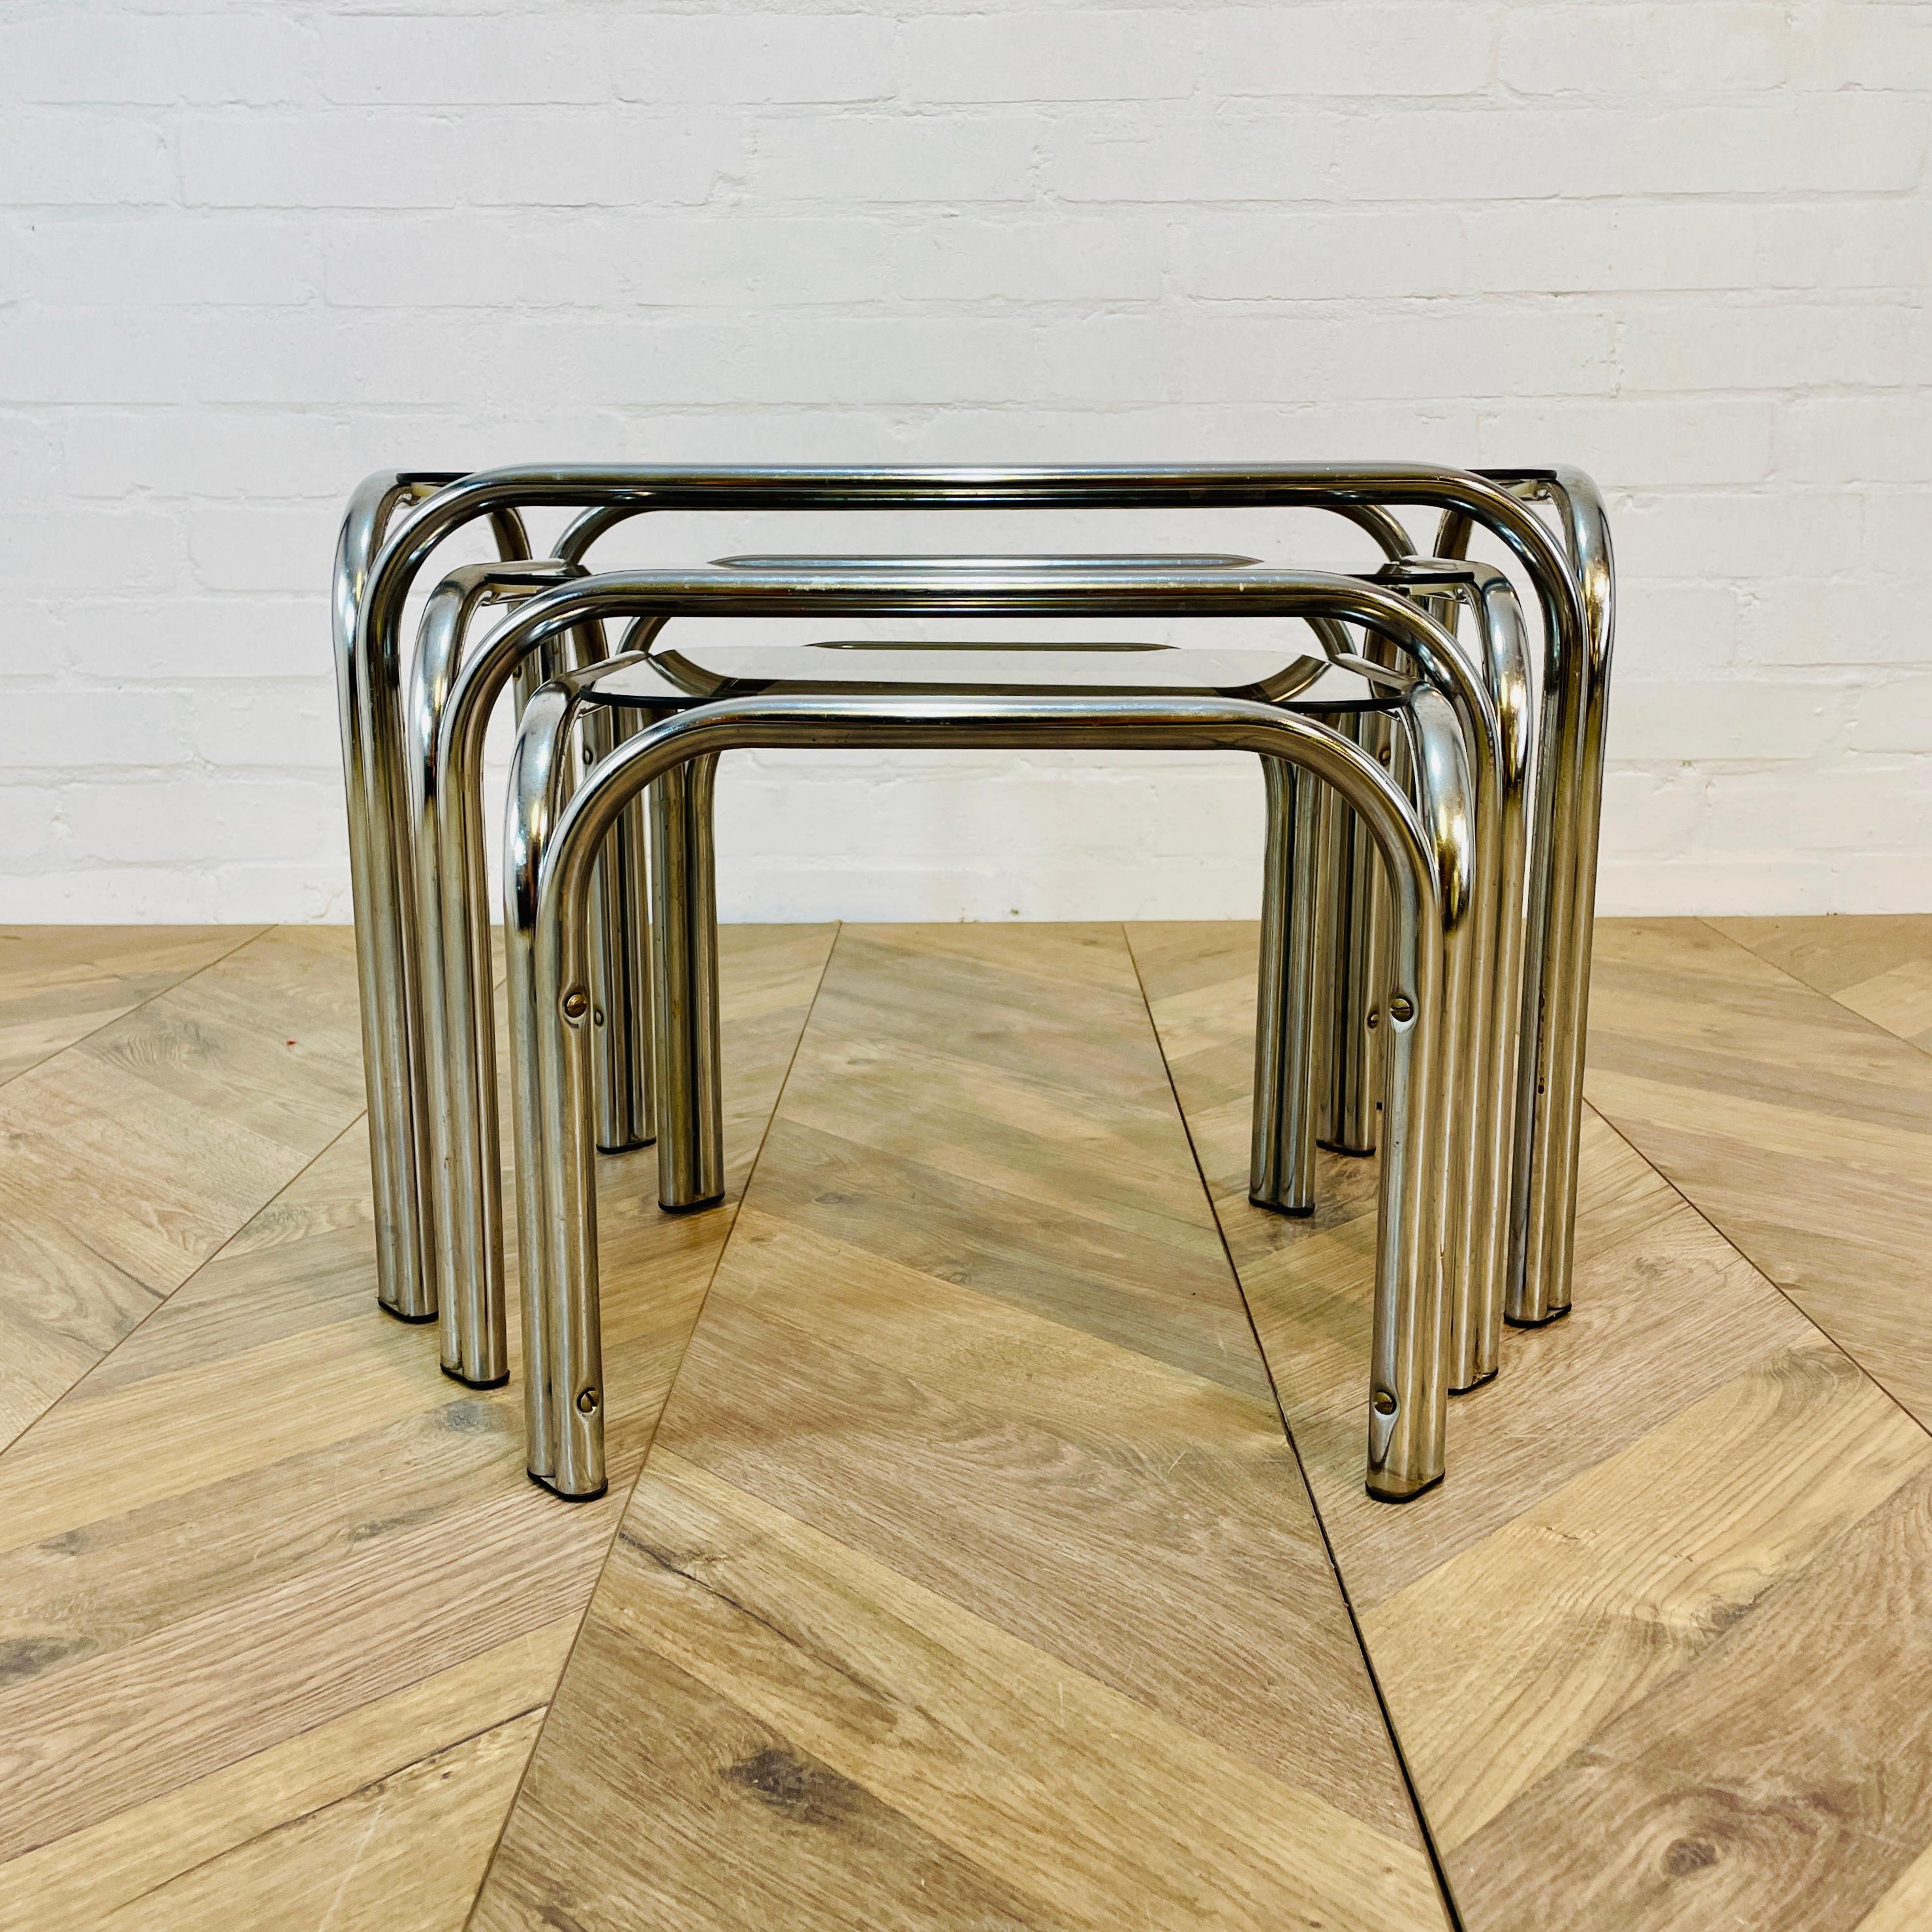 Vintage Smoked Glass + Chrome Nest of Tables, Set of 3, 1970s For Sale 5